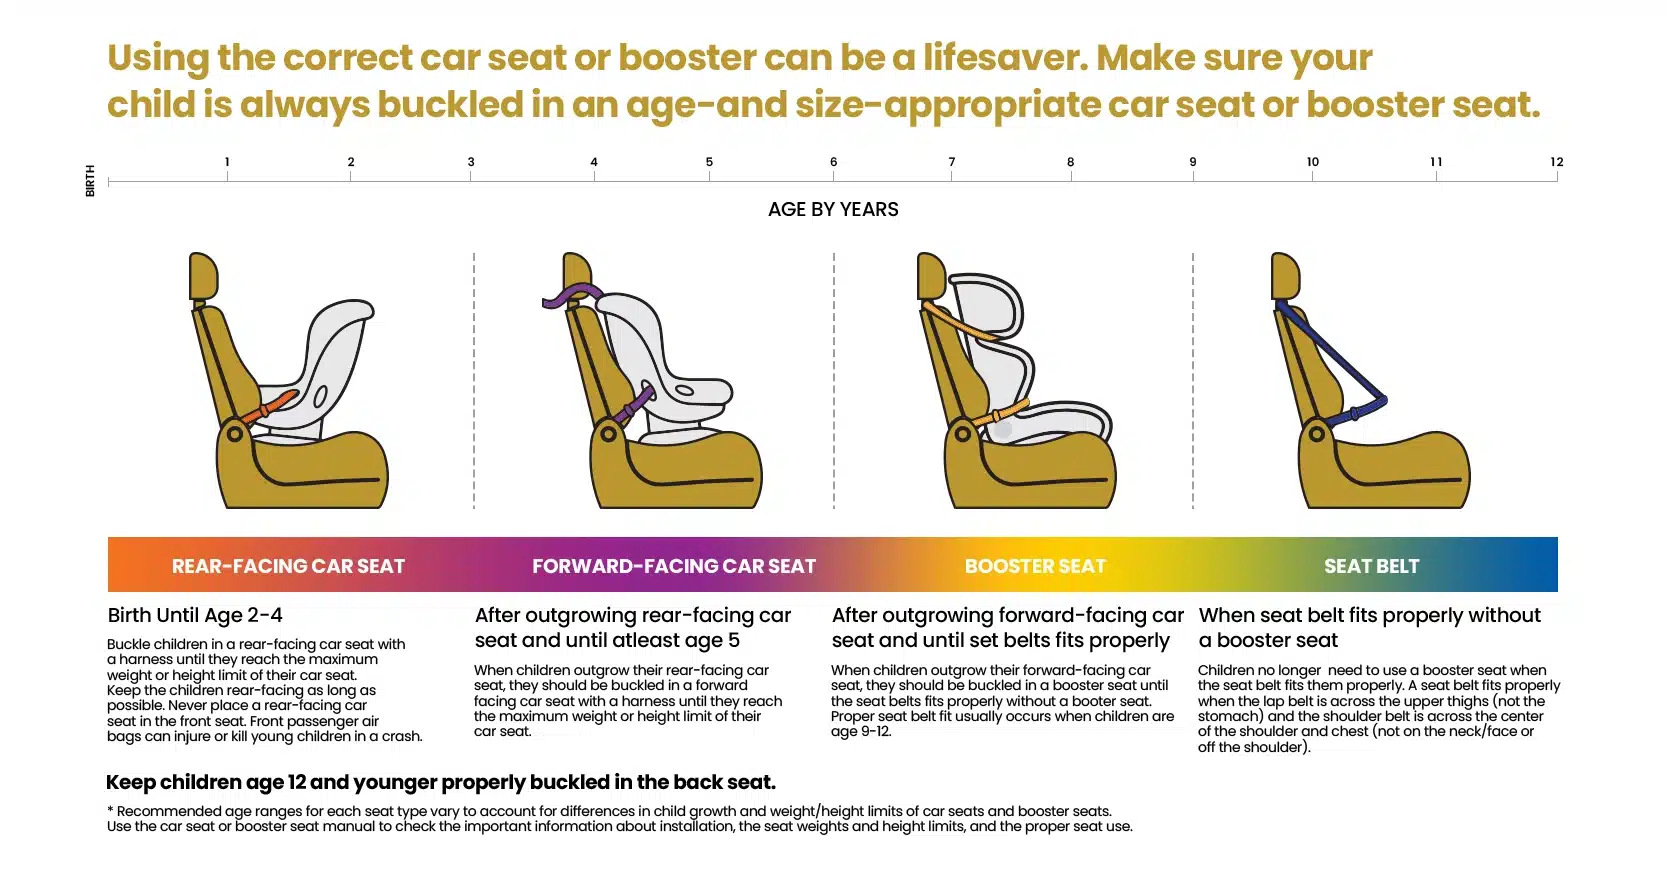 Texas Car Seat Laws - Complete Guide 2023 - How To Make Your Child Safe